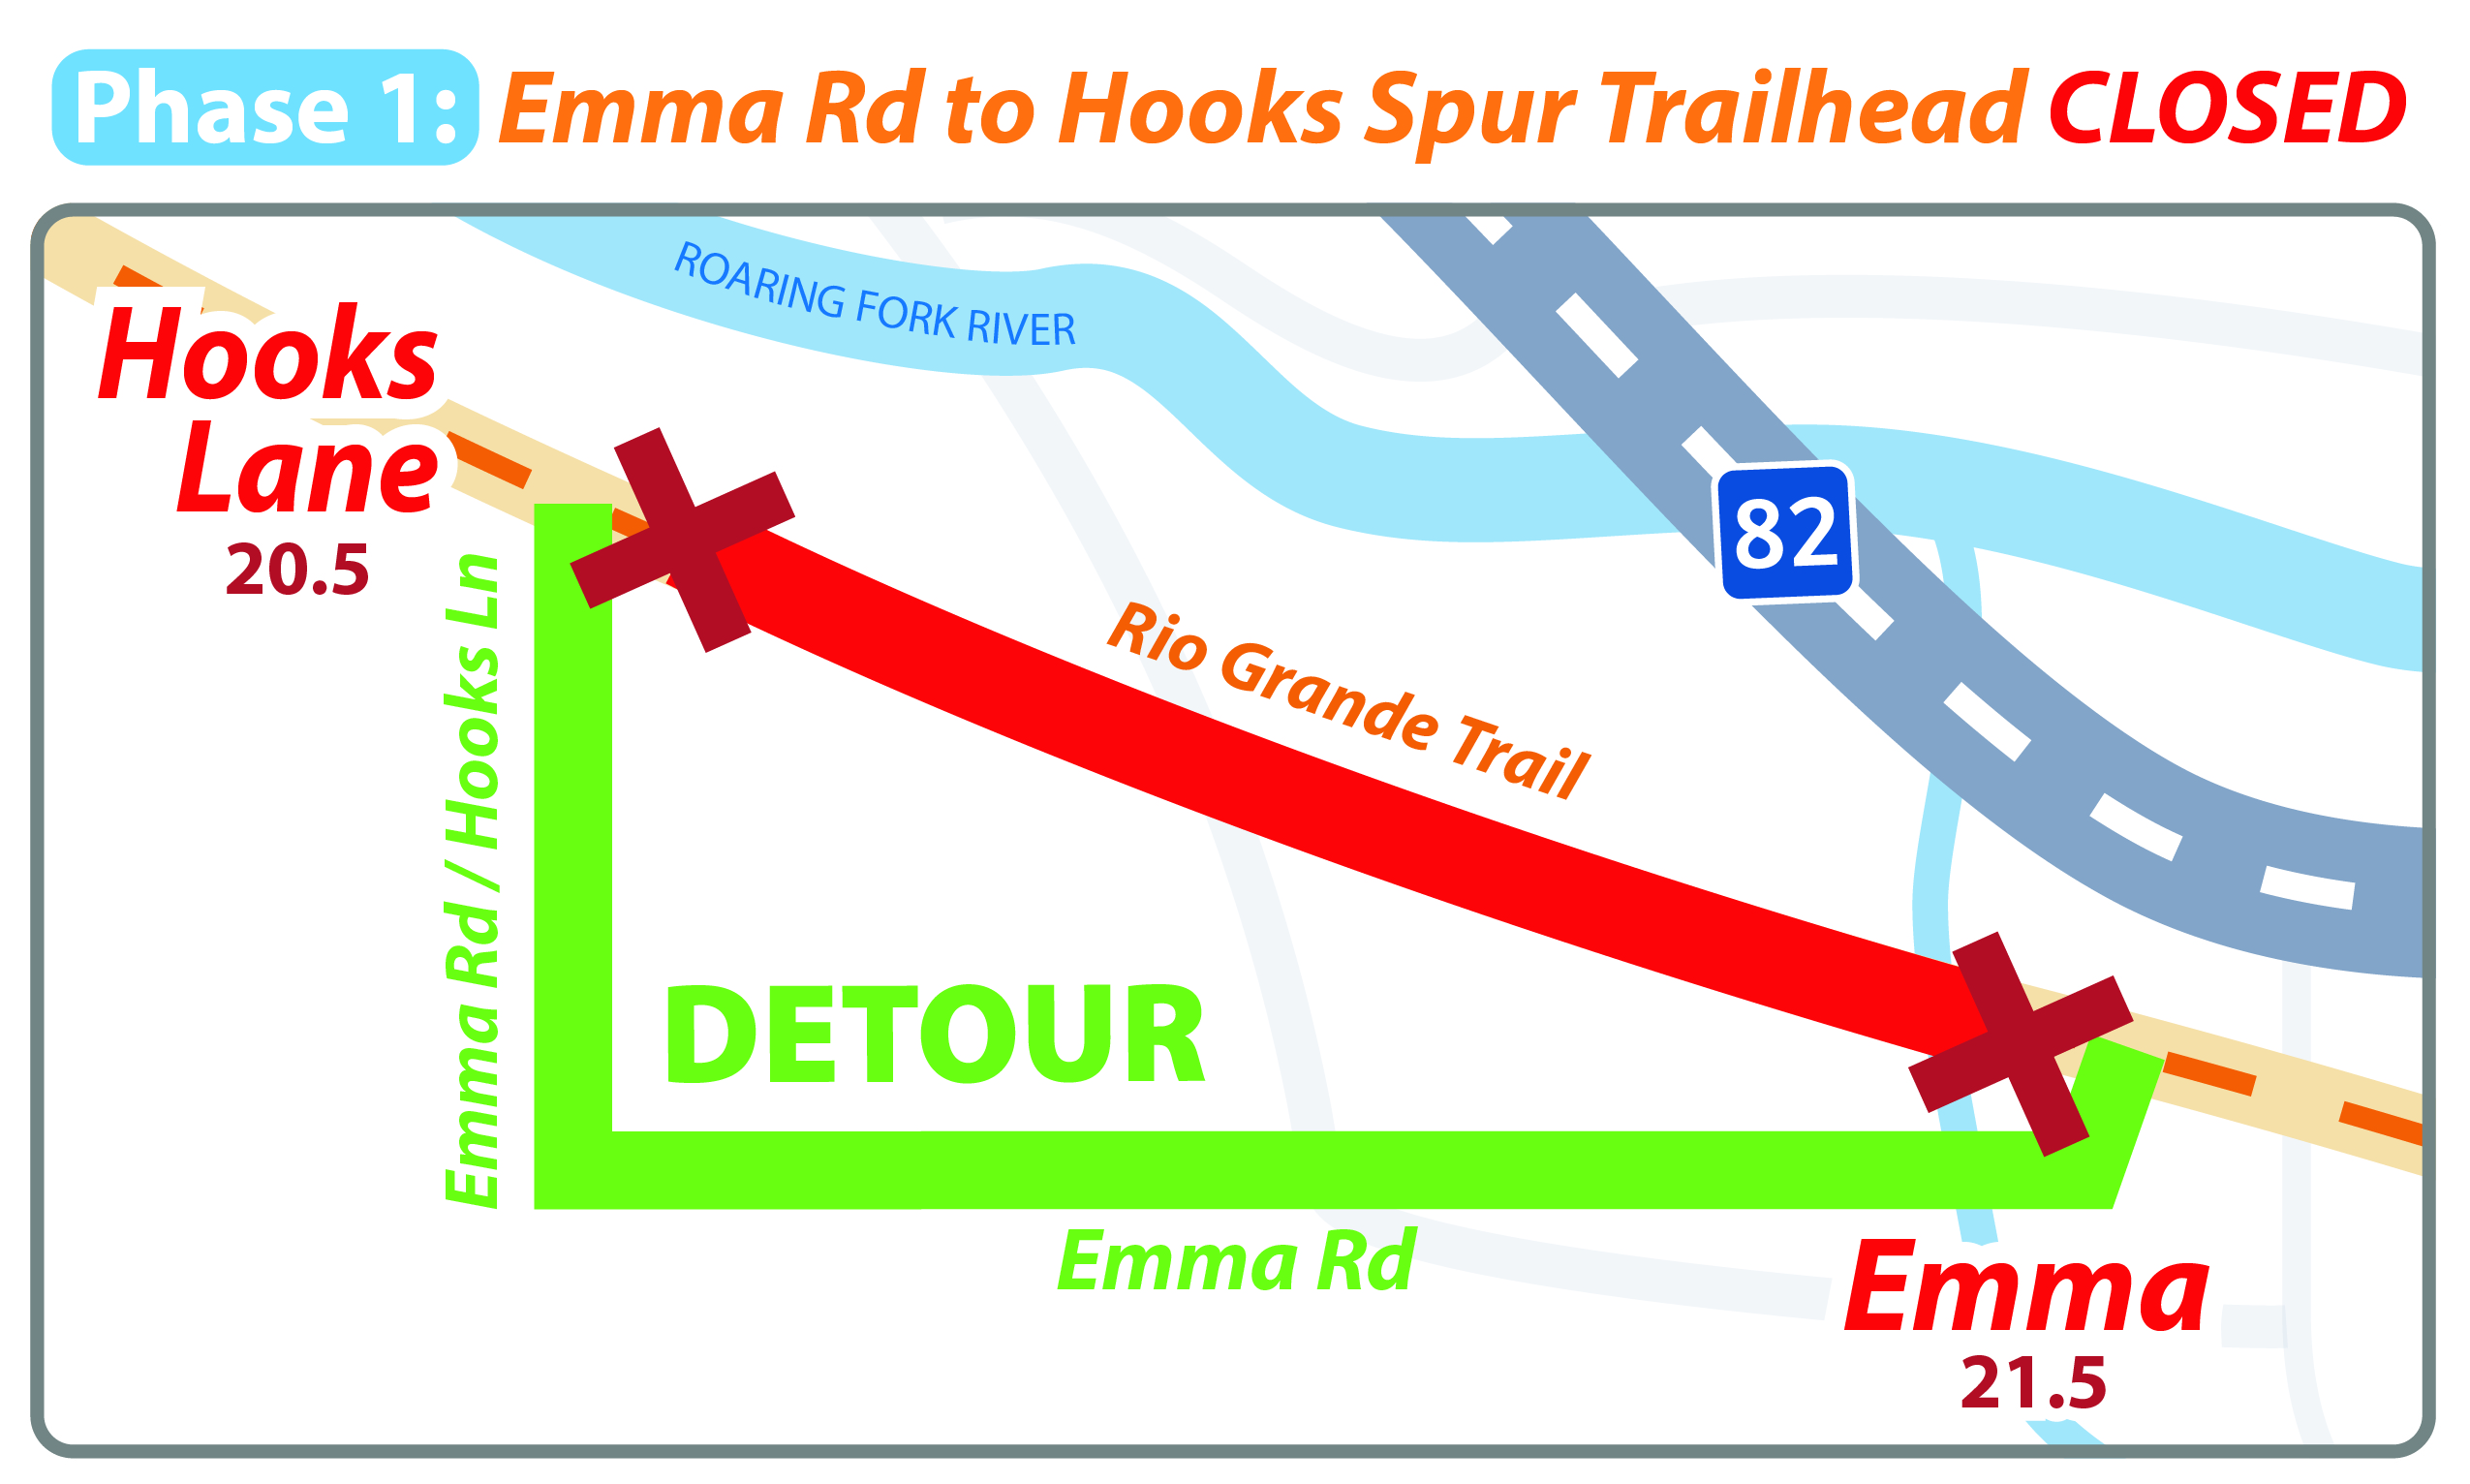 Map of Emma to Hooks Spur Trailhead closure on the Rio Grande Trail, showing the detour route: Emma Road to Hooks Lane.